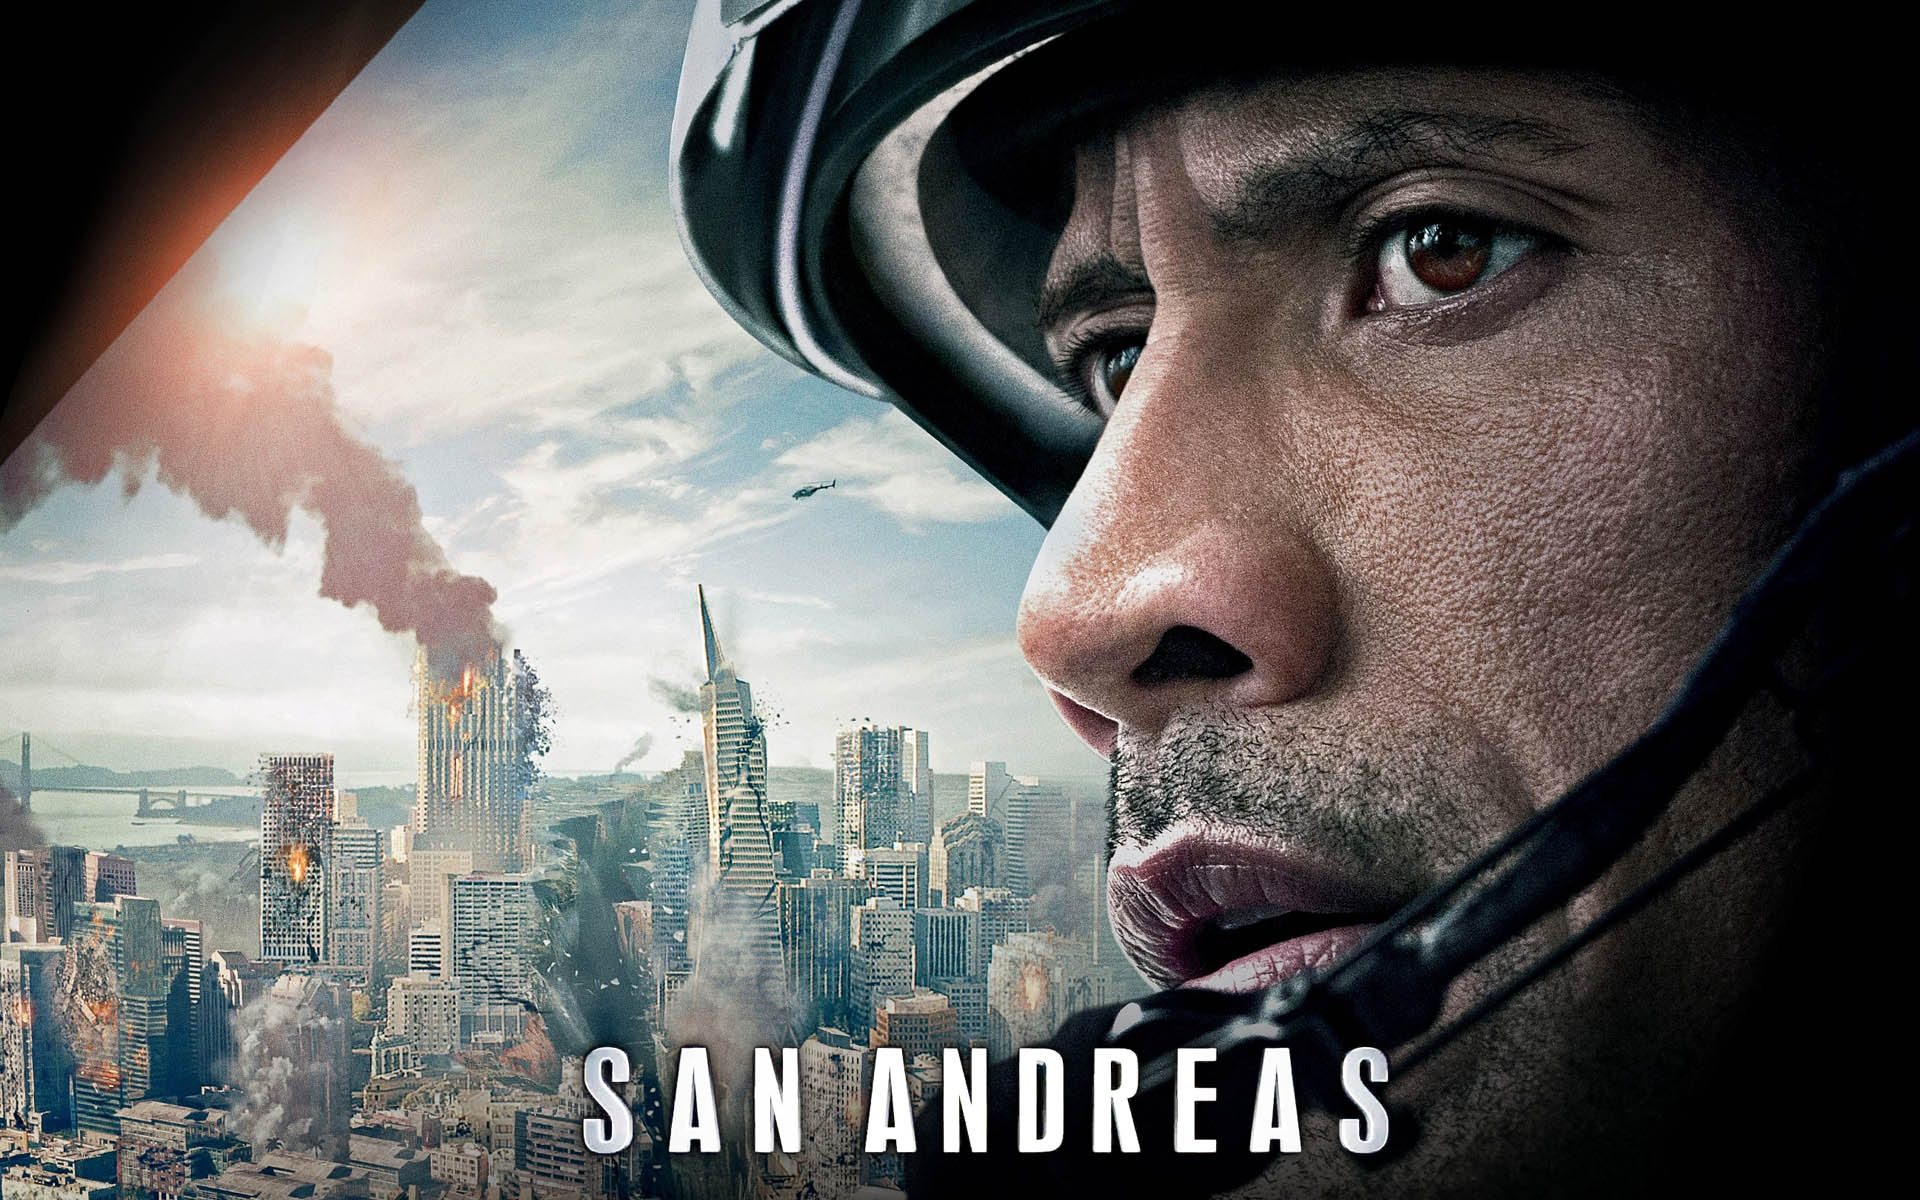 San andreas full movie 2015 free online - whoserre